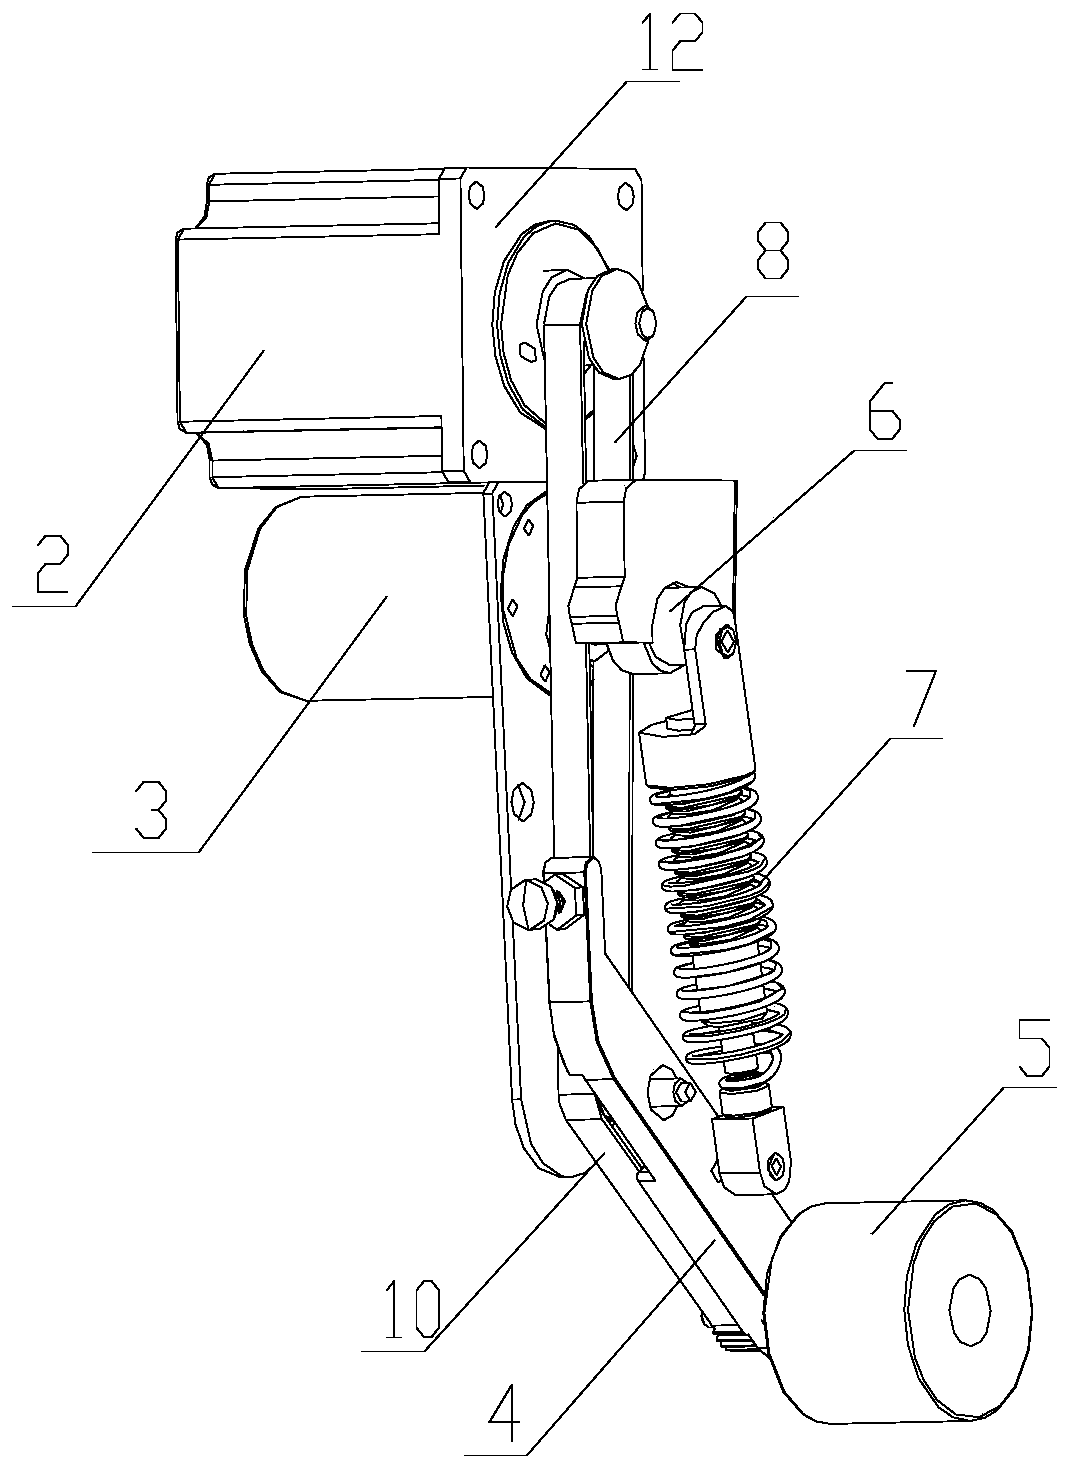 Cloth pulling wheel device capable of being slightly adjusted for sewing machine